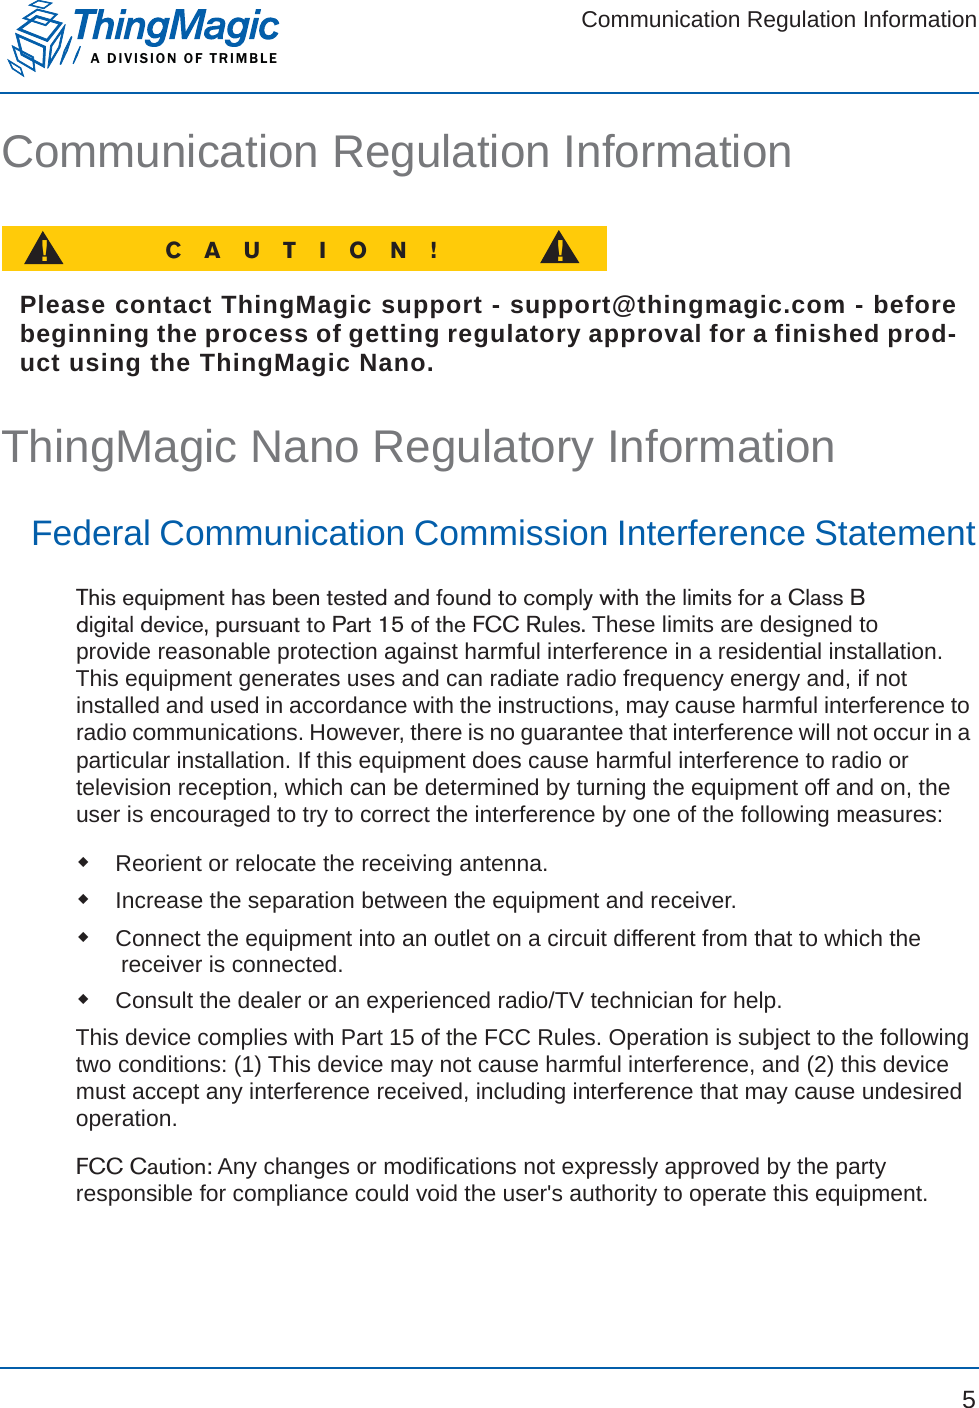 Communication Regulation InformationA DIVISION OF TRIMBLE5Communication Regulation InformationCAUTION!!!Please contact ThingMagic support - support@thingmagic.com - beforebeginning the process of getting regulatory approval for a finished prod-uct using the ThingMagic Nano.ThingMagic Nano Regulatory InformationFederal Communication Commission Interference StatementThis equipment has been tested and found to comply with the limits for a Class B digital device, pursuant to Part 15 of the FCC Rules. These limits are designed to provide reasonable protection against harmful interference in a residential installation. This equipment generates uses and can radiate radio frequency energy and, if not installed and used in accordance with the instructions, may cause harmful interference to radio communications. However, there is no guarantee that interference will not occur in a particular installation. If this equipment does cause harmful interference to radio or television reception, which can be determined by turning the equipment off and on, the user is encouraged to try to correct the interference by one of the following measures:Reorient or relocate the receiving antenna.Increase the separation between the equipment and receiver.Connect the equipment into an outlet on a circuit different from that to which the receiver is connected.Consult the dealer or an experienced radio/TV technician for help.This device complies with Part 15 of the FCC Rules. Operation is subject to the following two conditions: (1) This device may not cause harmful interference, and (2) this device must accept any interference received, including interference that may cause undesired operation.FCC Caution: Any changes or modifications not expressly approved by the party responsible for compliance could void the user&apos;s authority to operate this equipment.